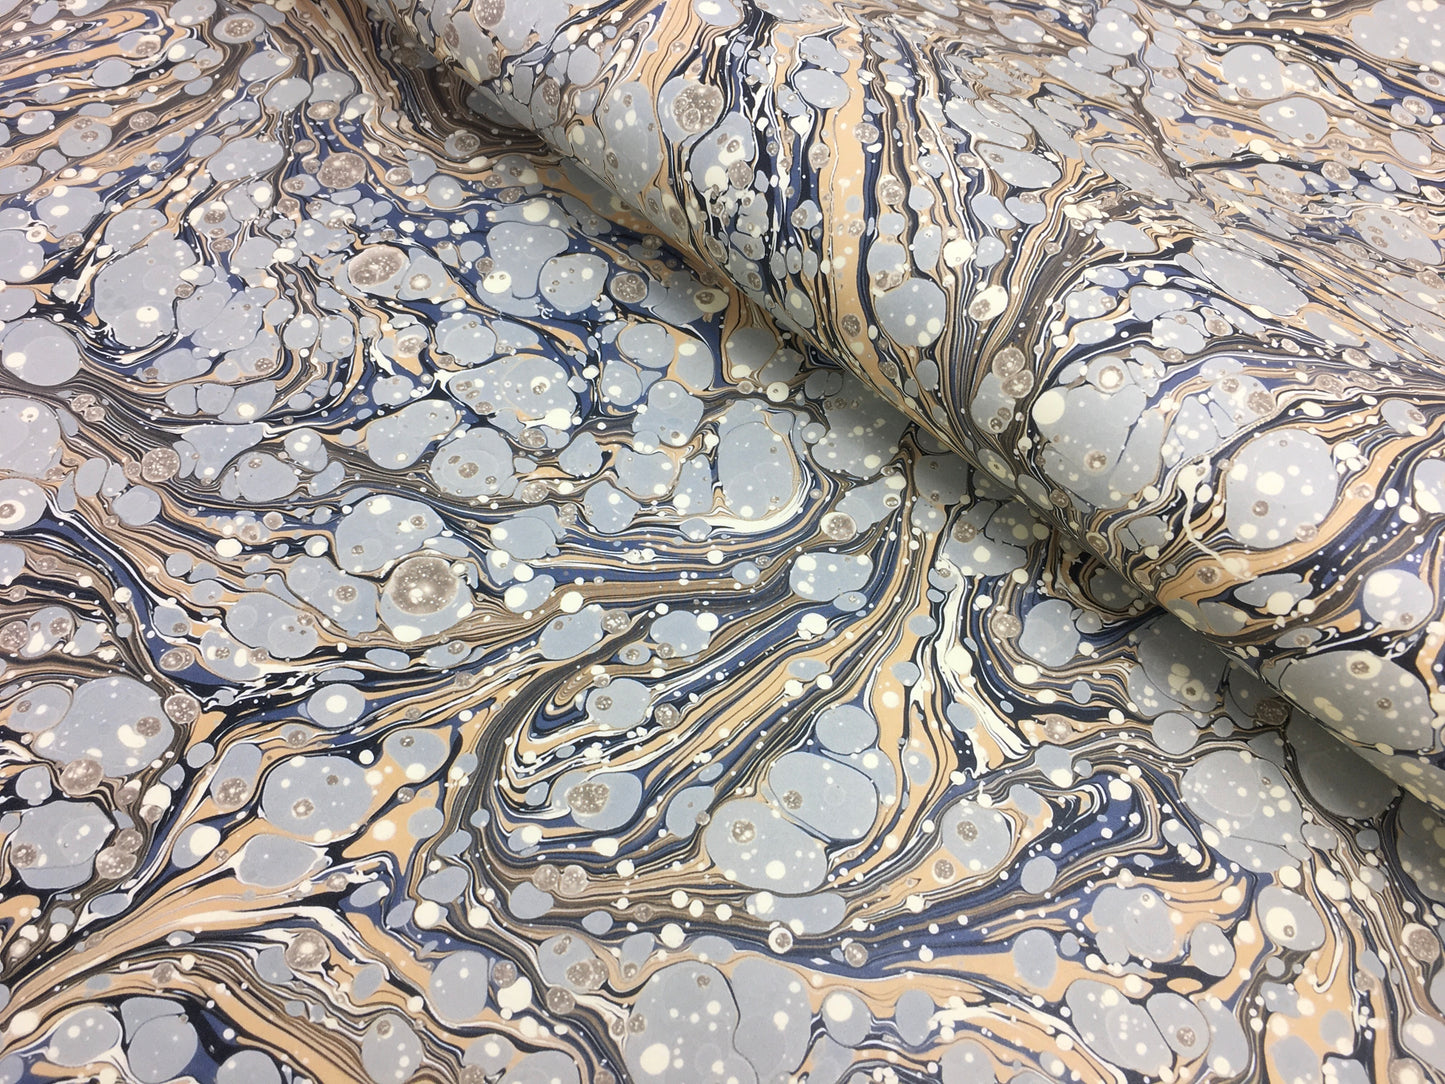 Printed marbled paper- HIGH DEFINITION- THICK 100GSM ACID FREE PAPER - Suitable for book covers and end sheets- TBBPM11